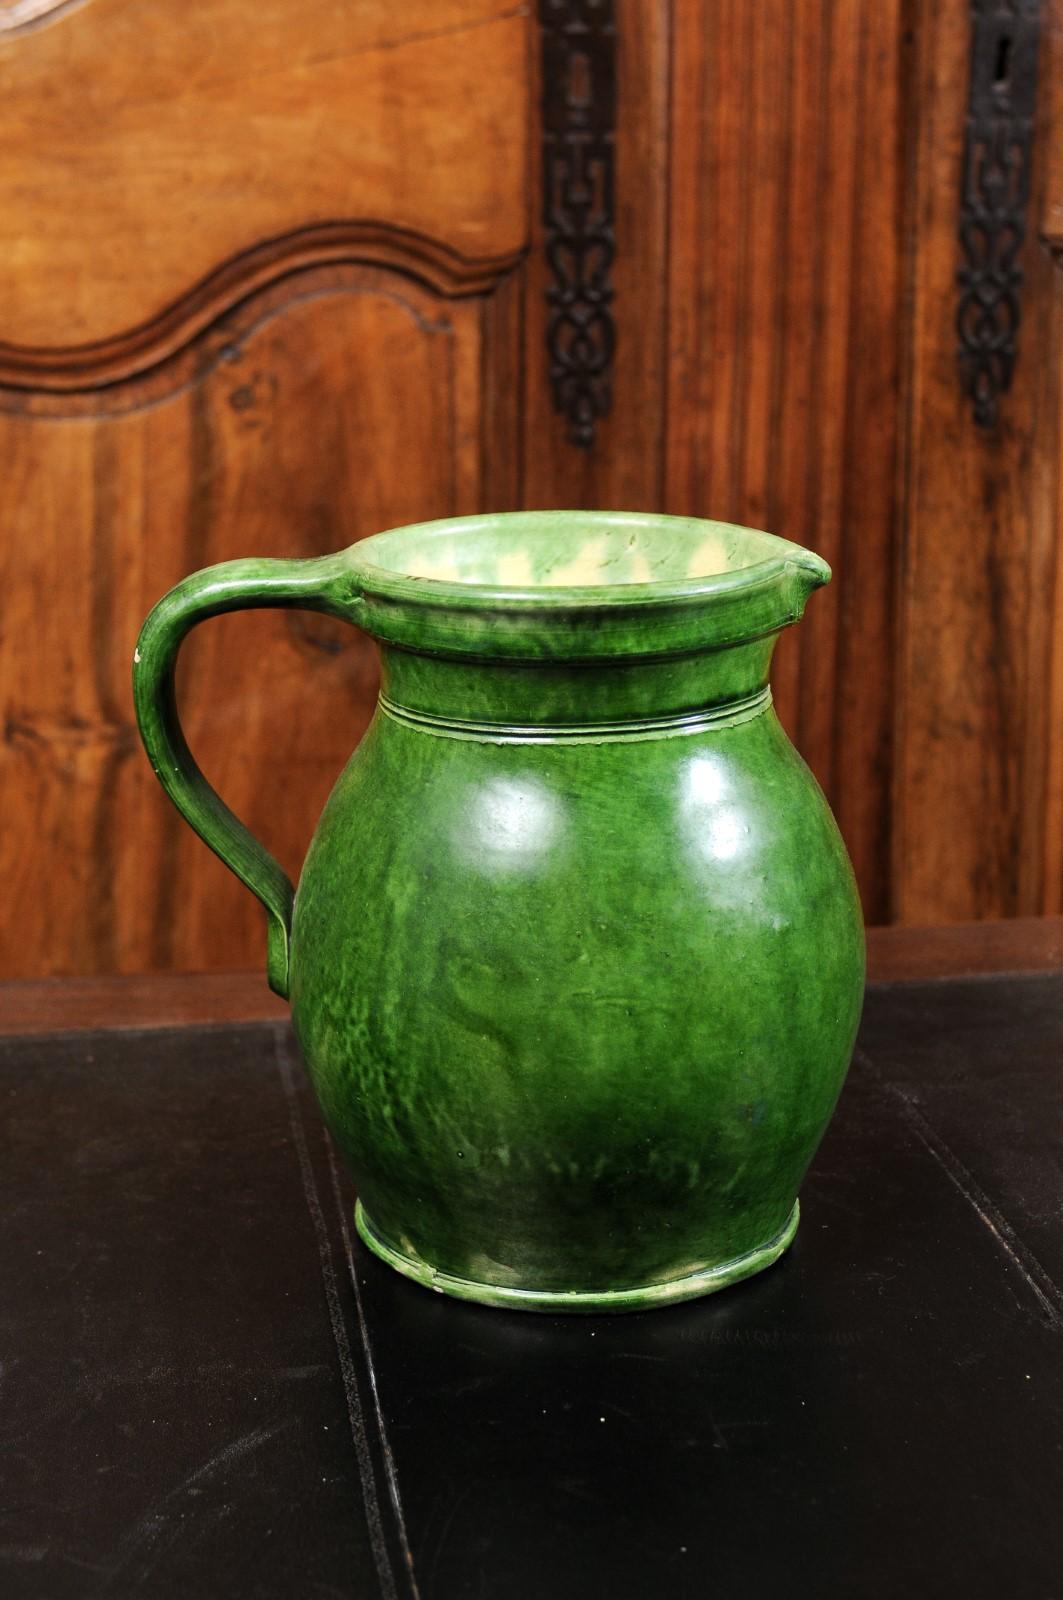 Rustic French Provincial 19th Century Pitcher with Green Glazed Body 8